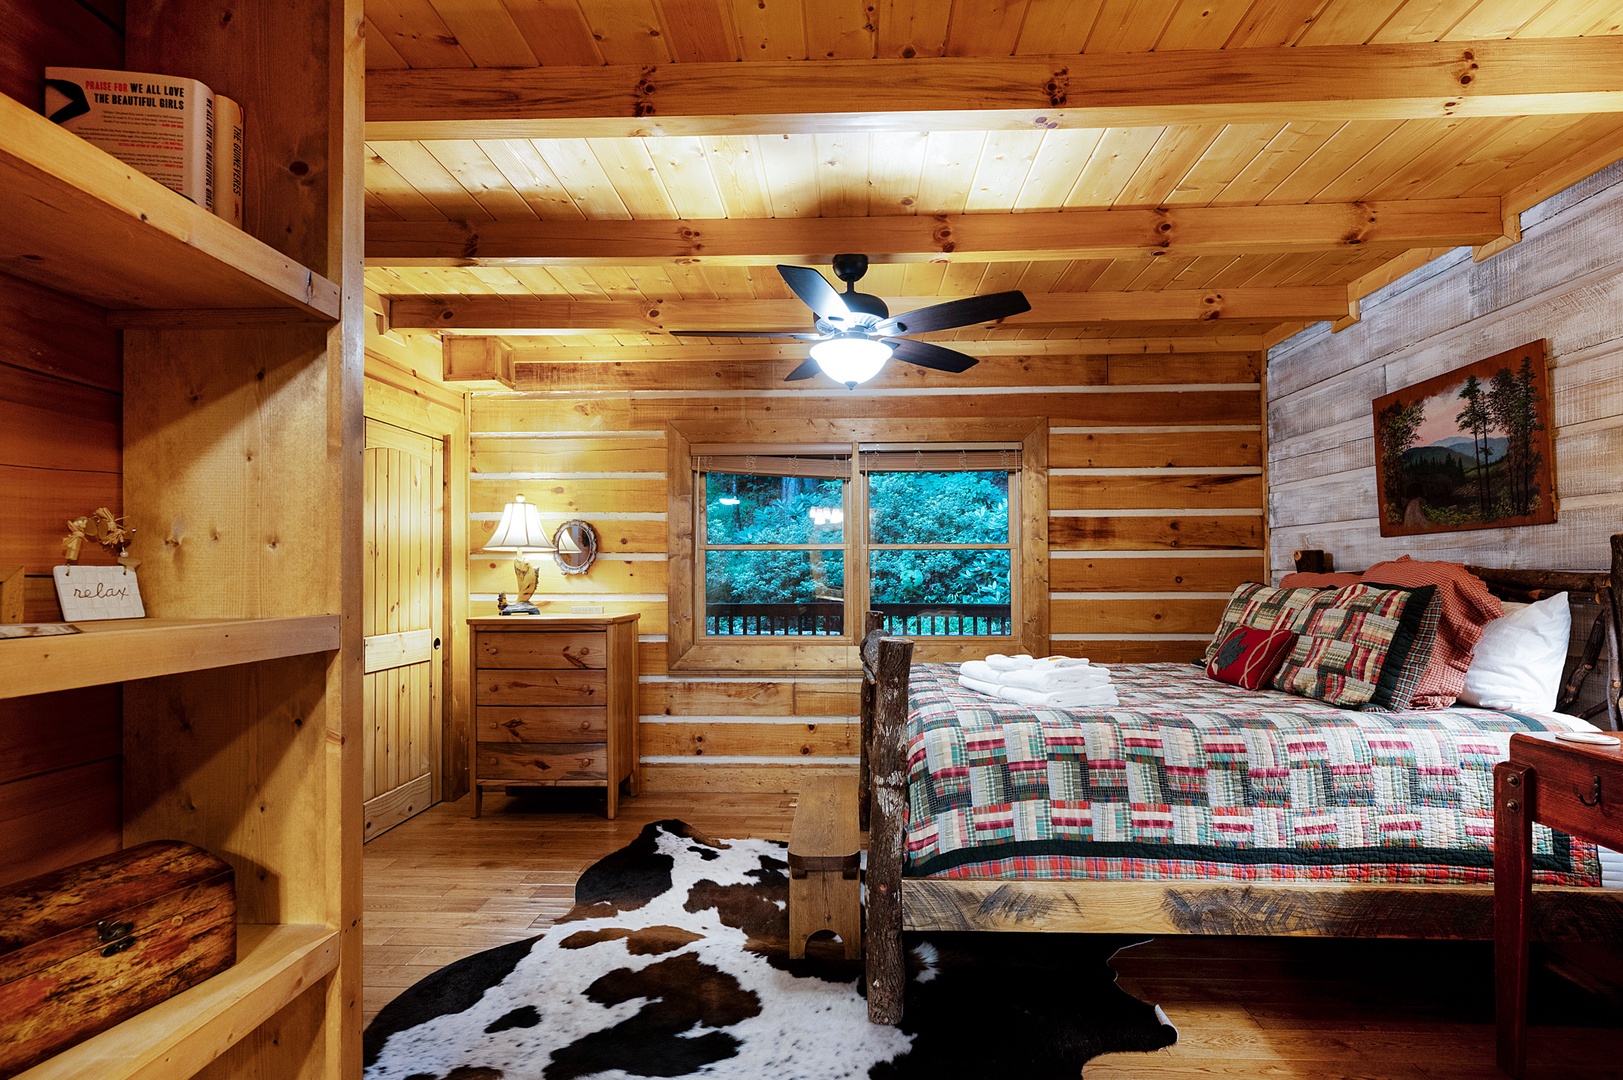 Mountaintown Creek Lodge - Entry Level Guest Bedroom